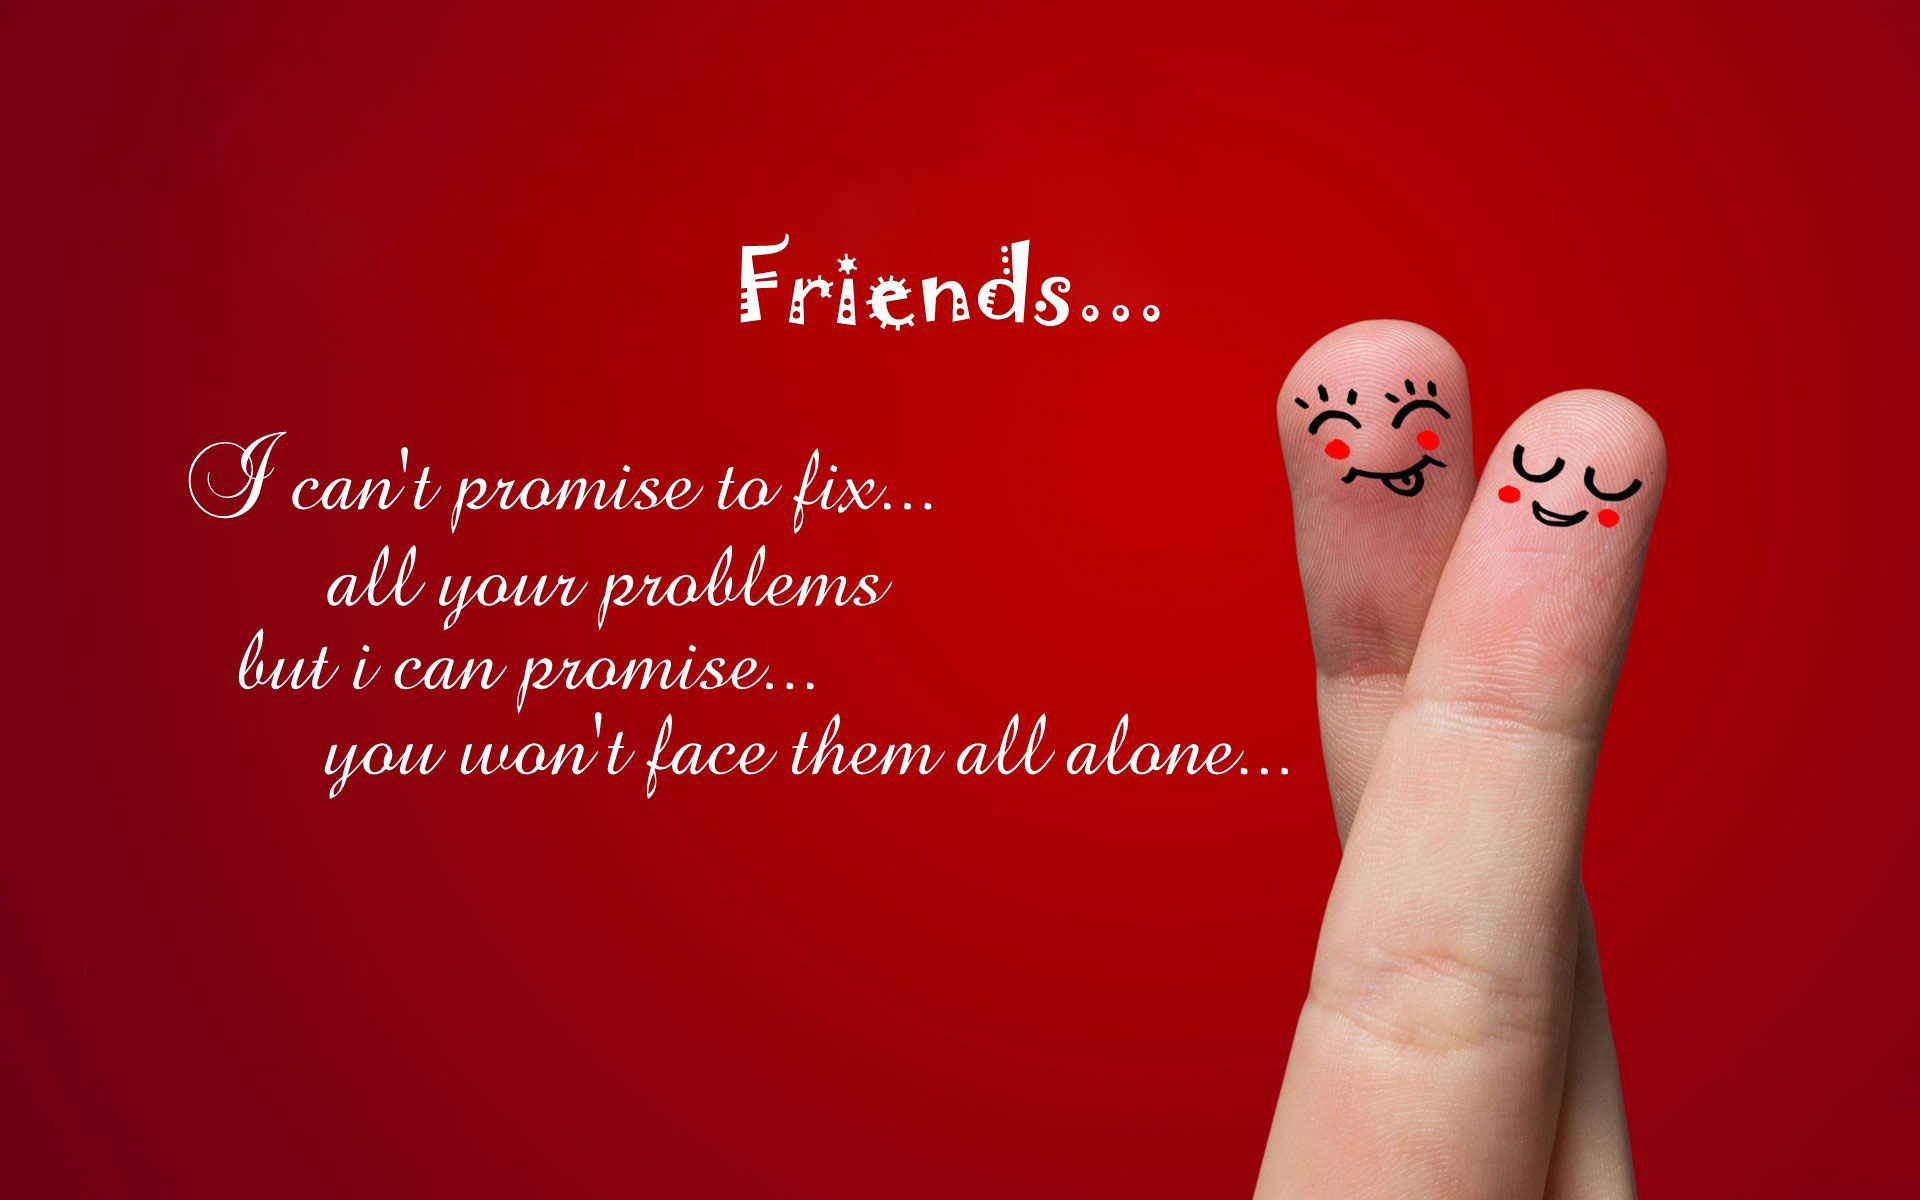 40+ Cute Friendship Quotes With Images | Friendship wallpapers -Chobirdokan